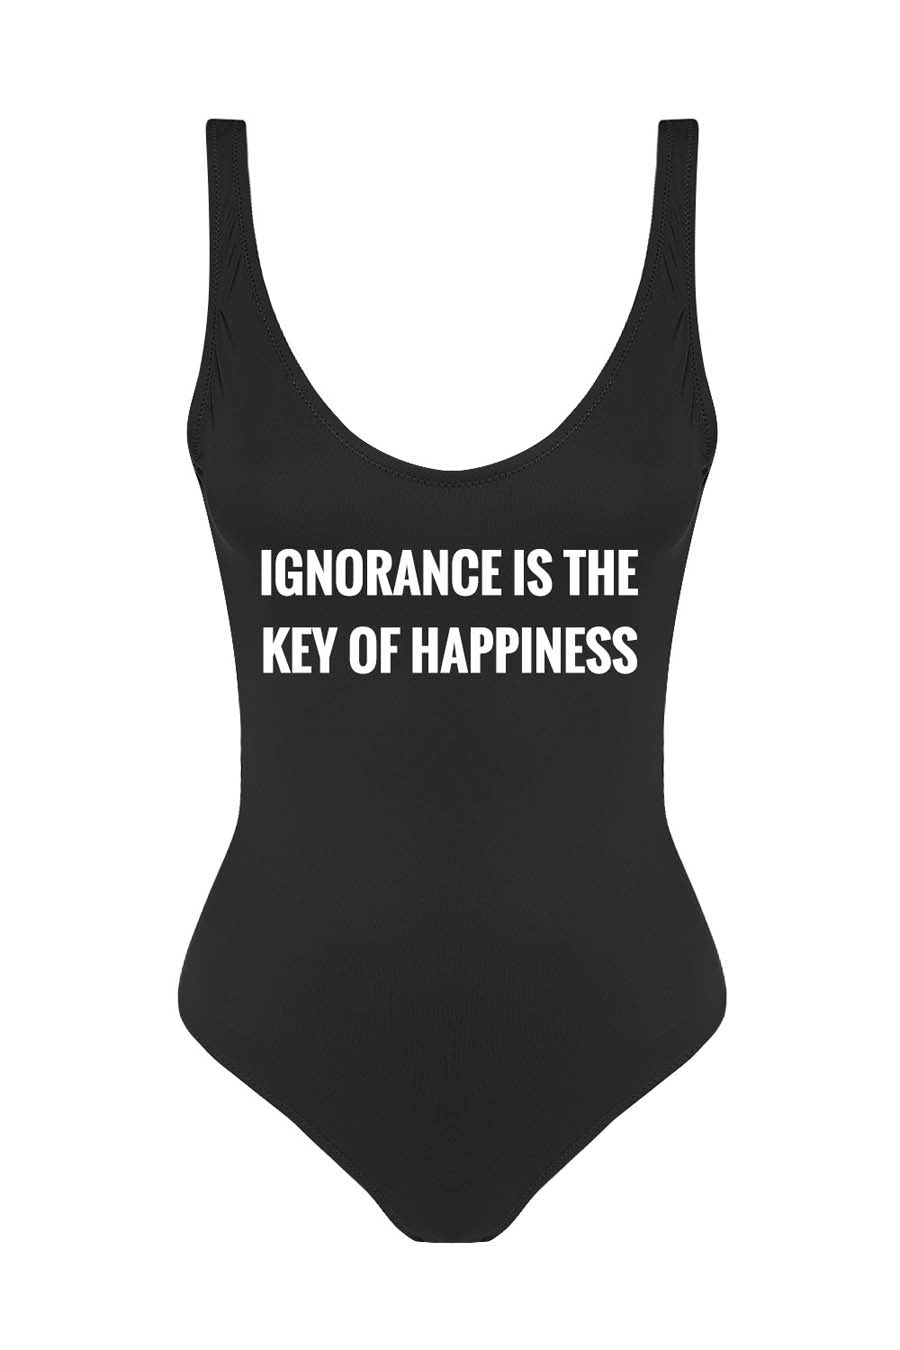 Ignorance is the key of happiness